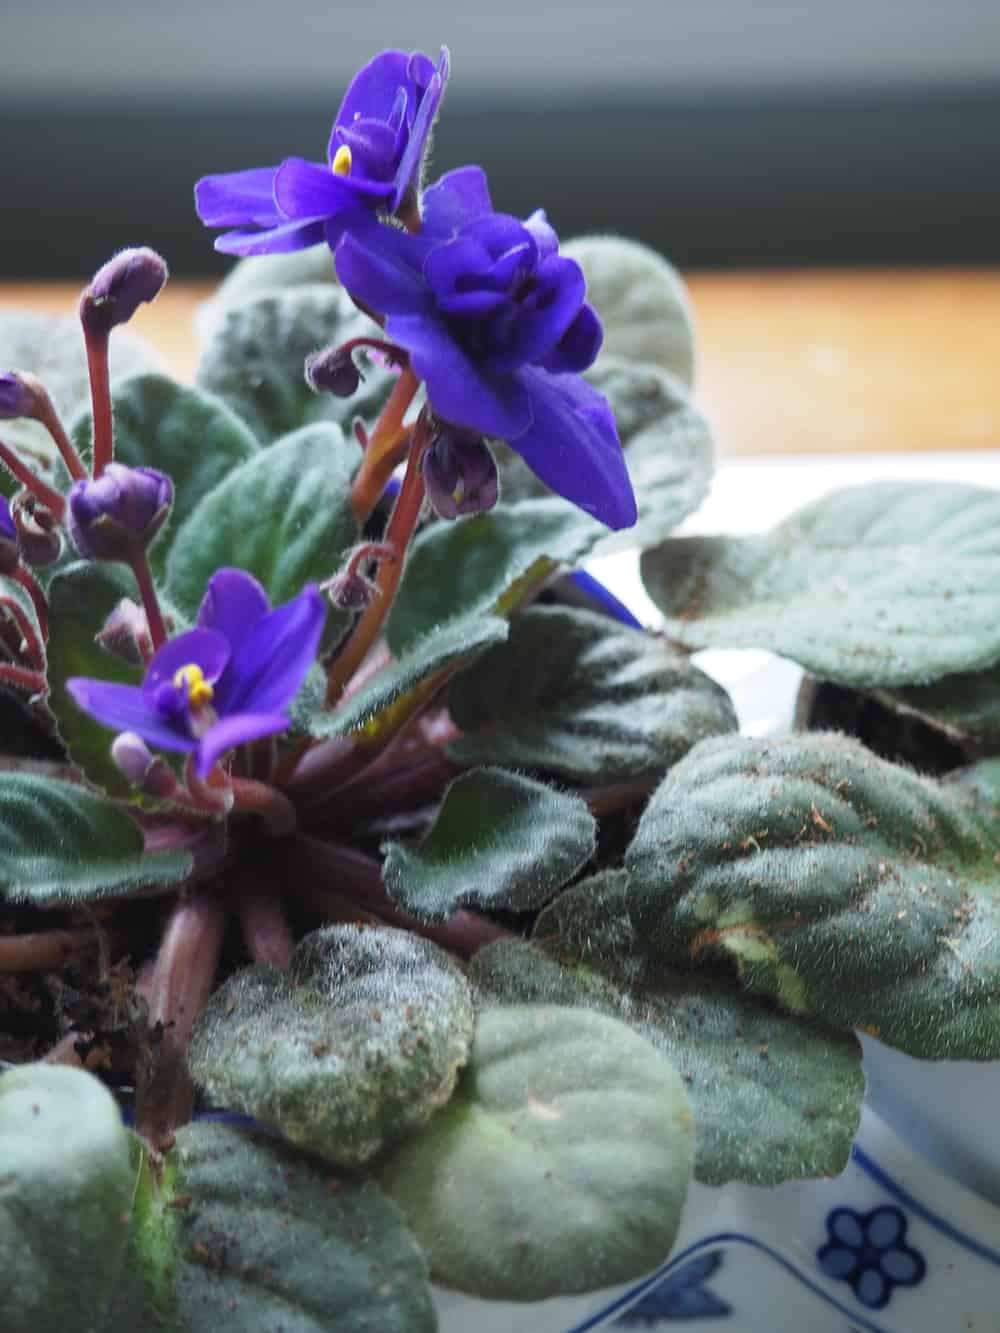 Offering plant care advice on how to help your African Violets bloom every week! | via Autumn All Along